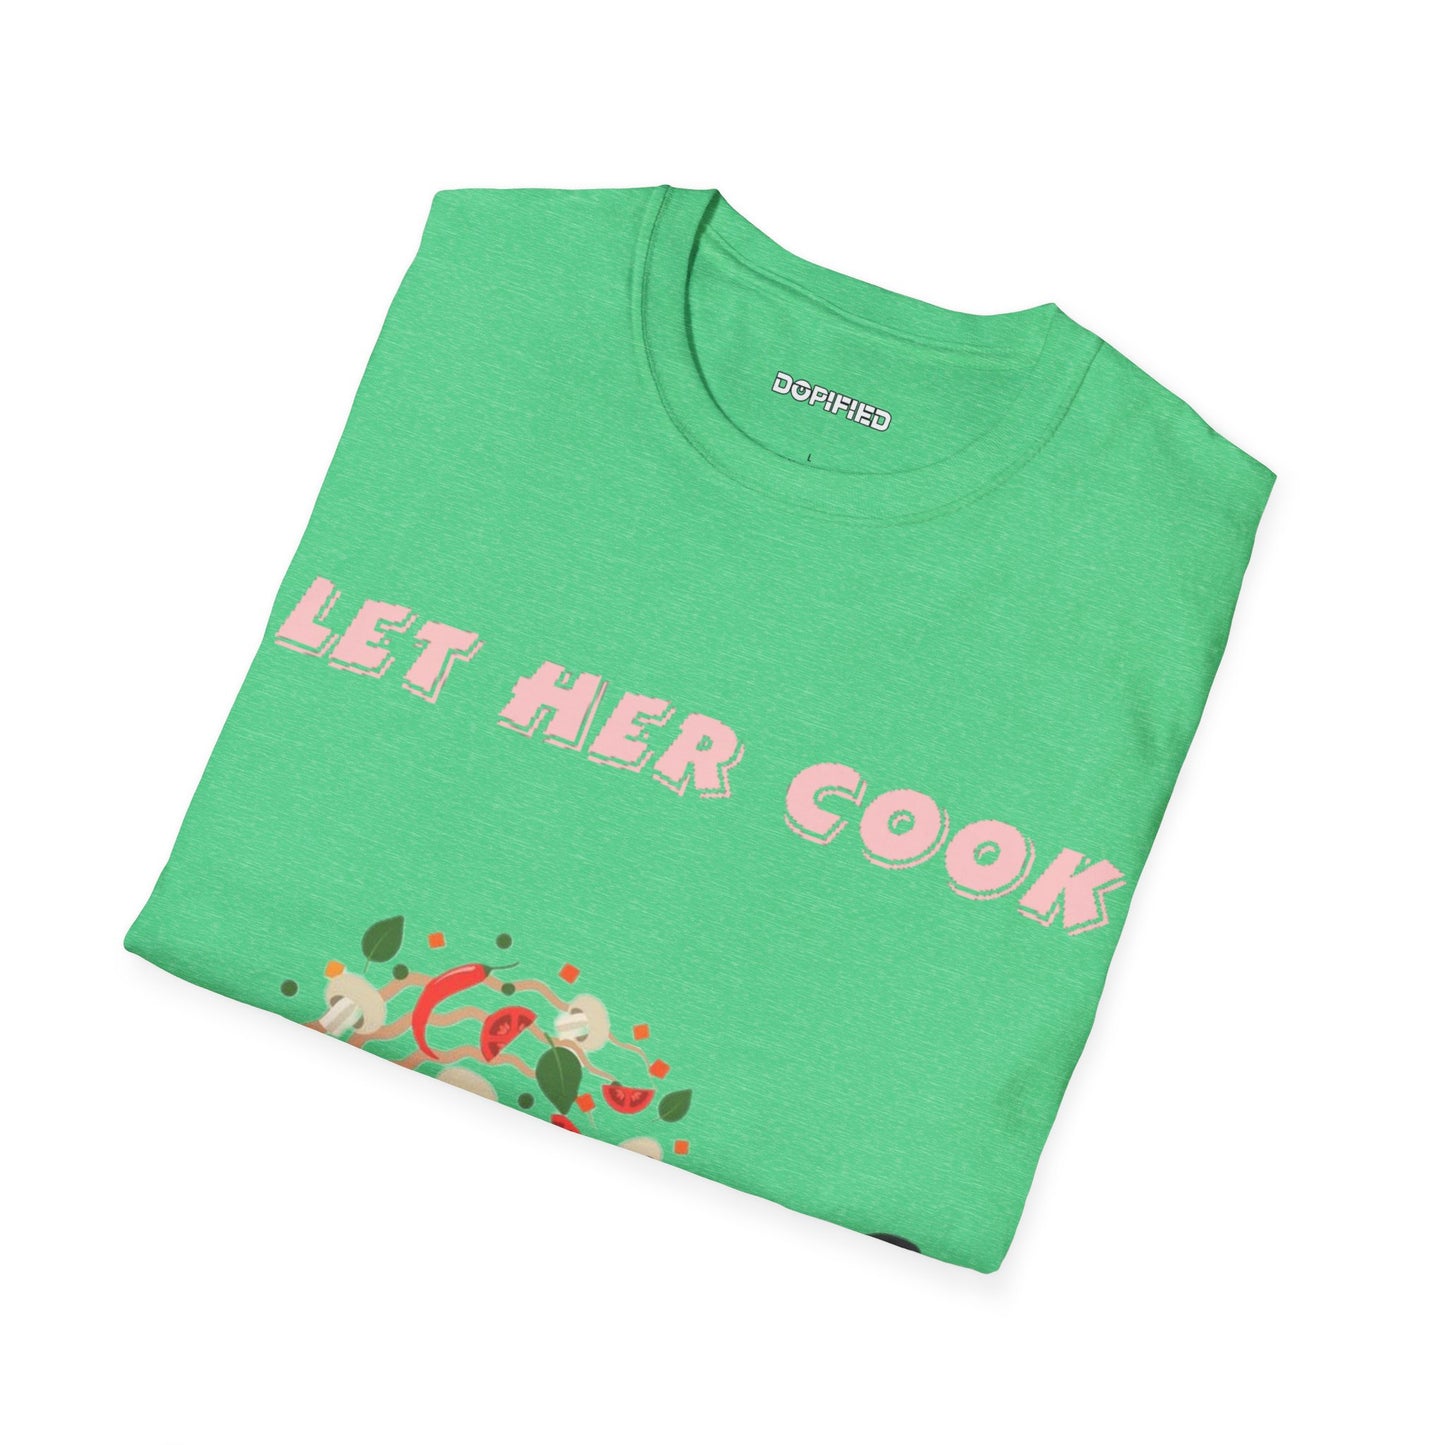 Let Her Cook‼️  Softstyle T-Shirt